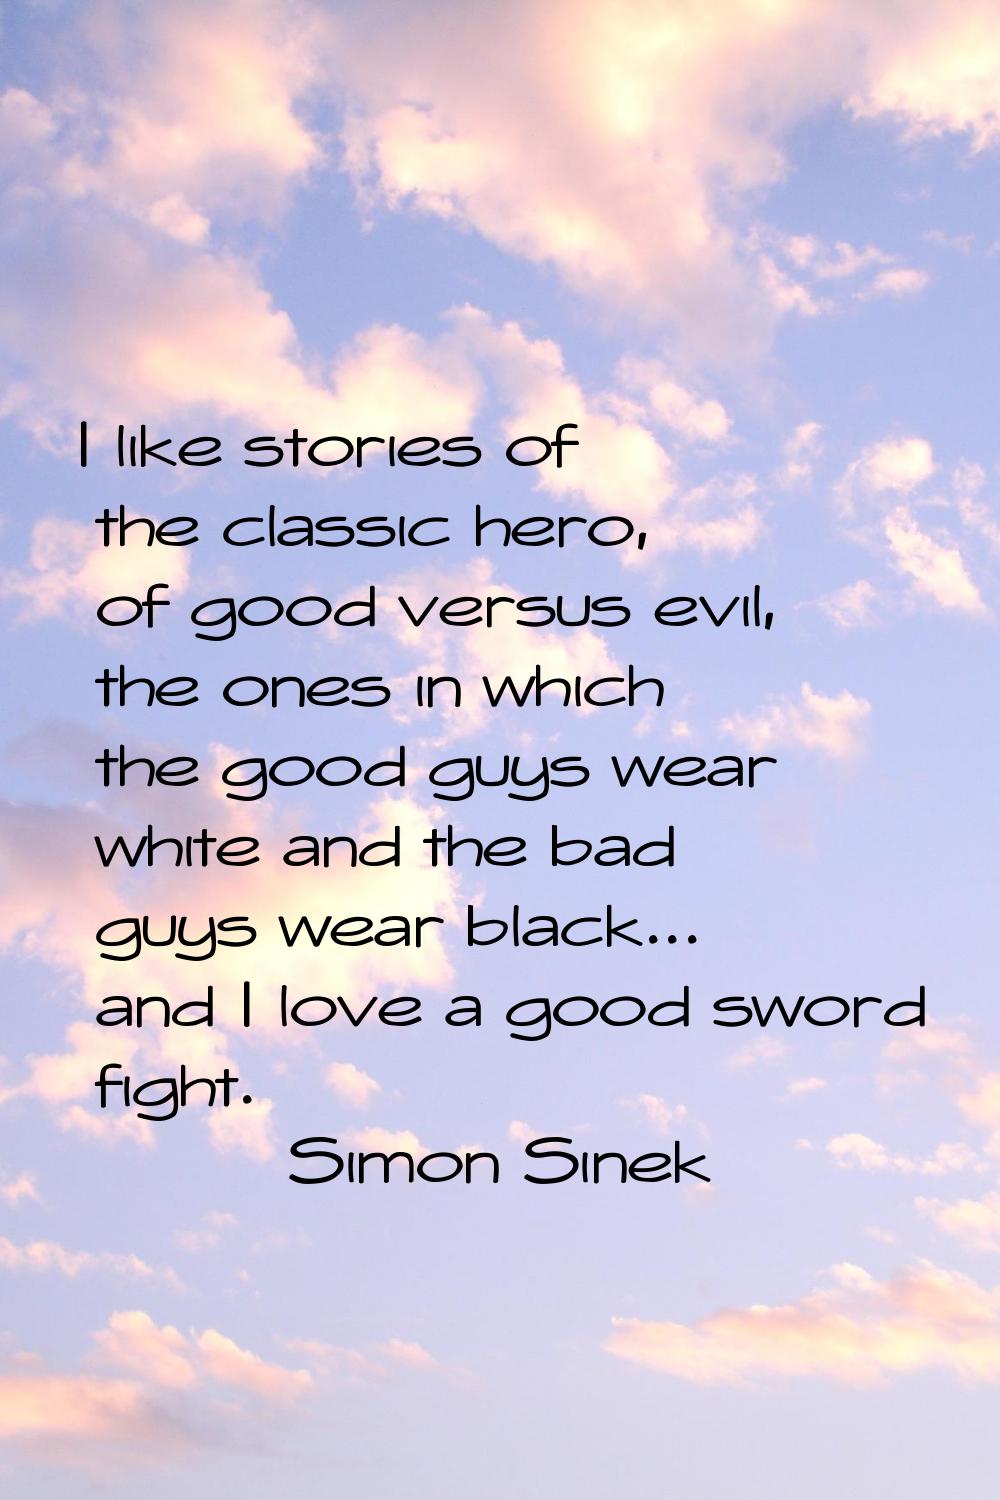 I like stories of the classic hero, of good versus evil, the ones in which the good guys wear white